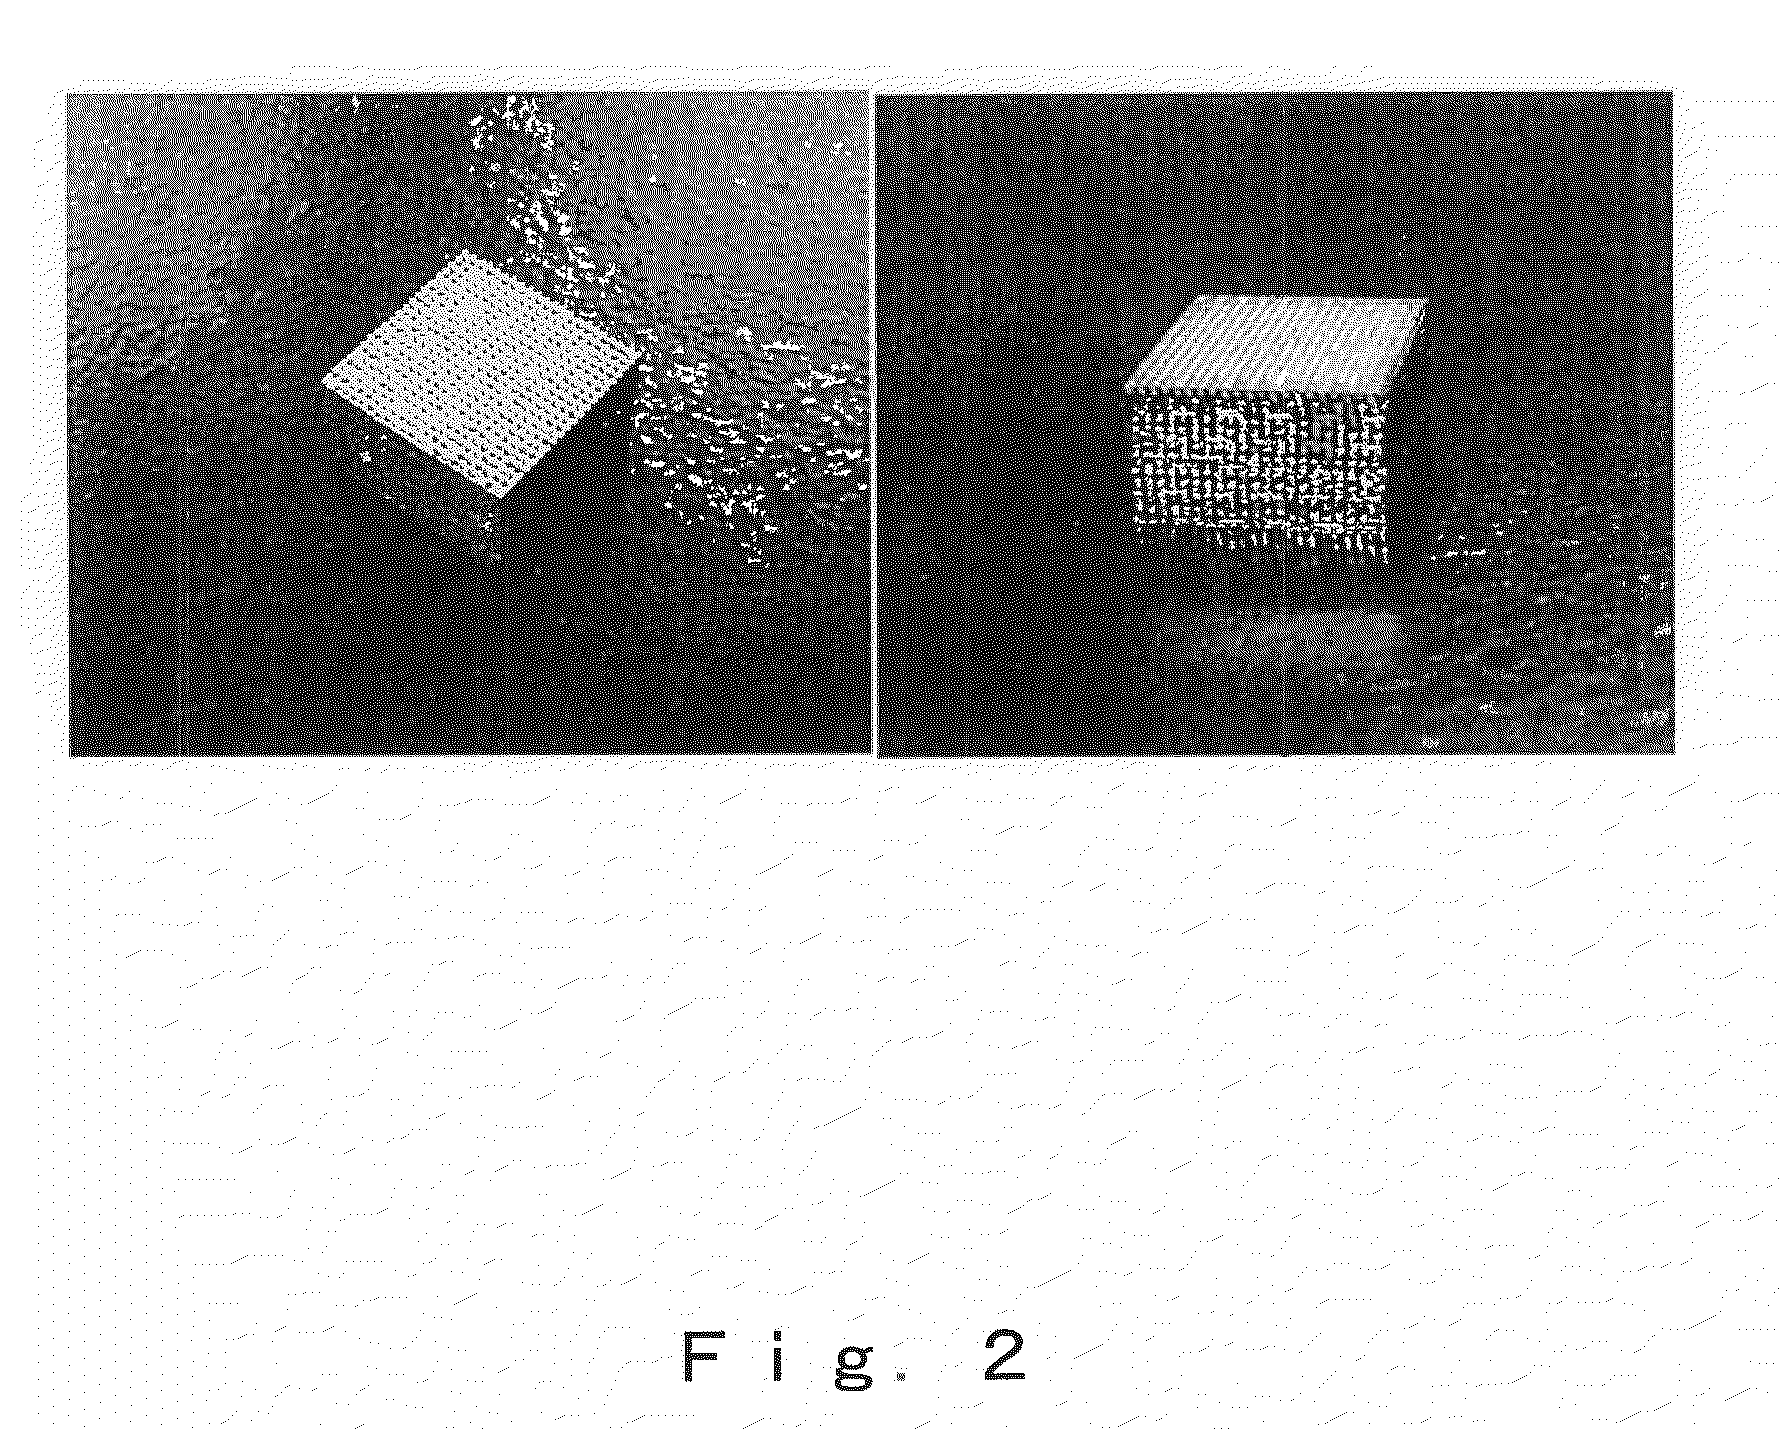 Biomaterial, method of constructing the same and use thereof